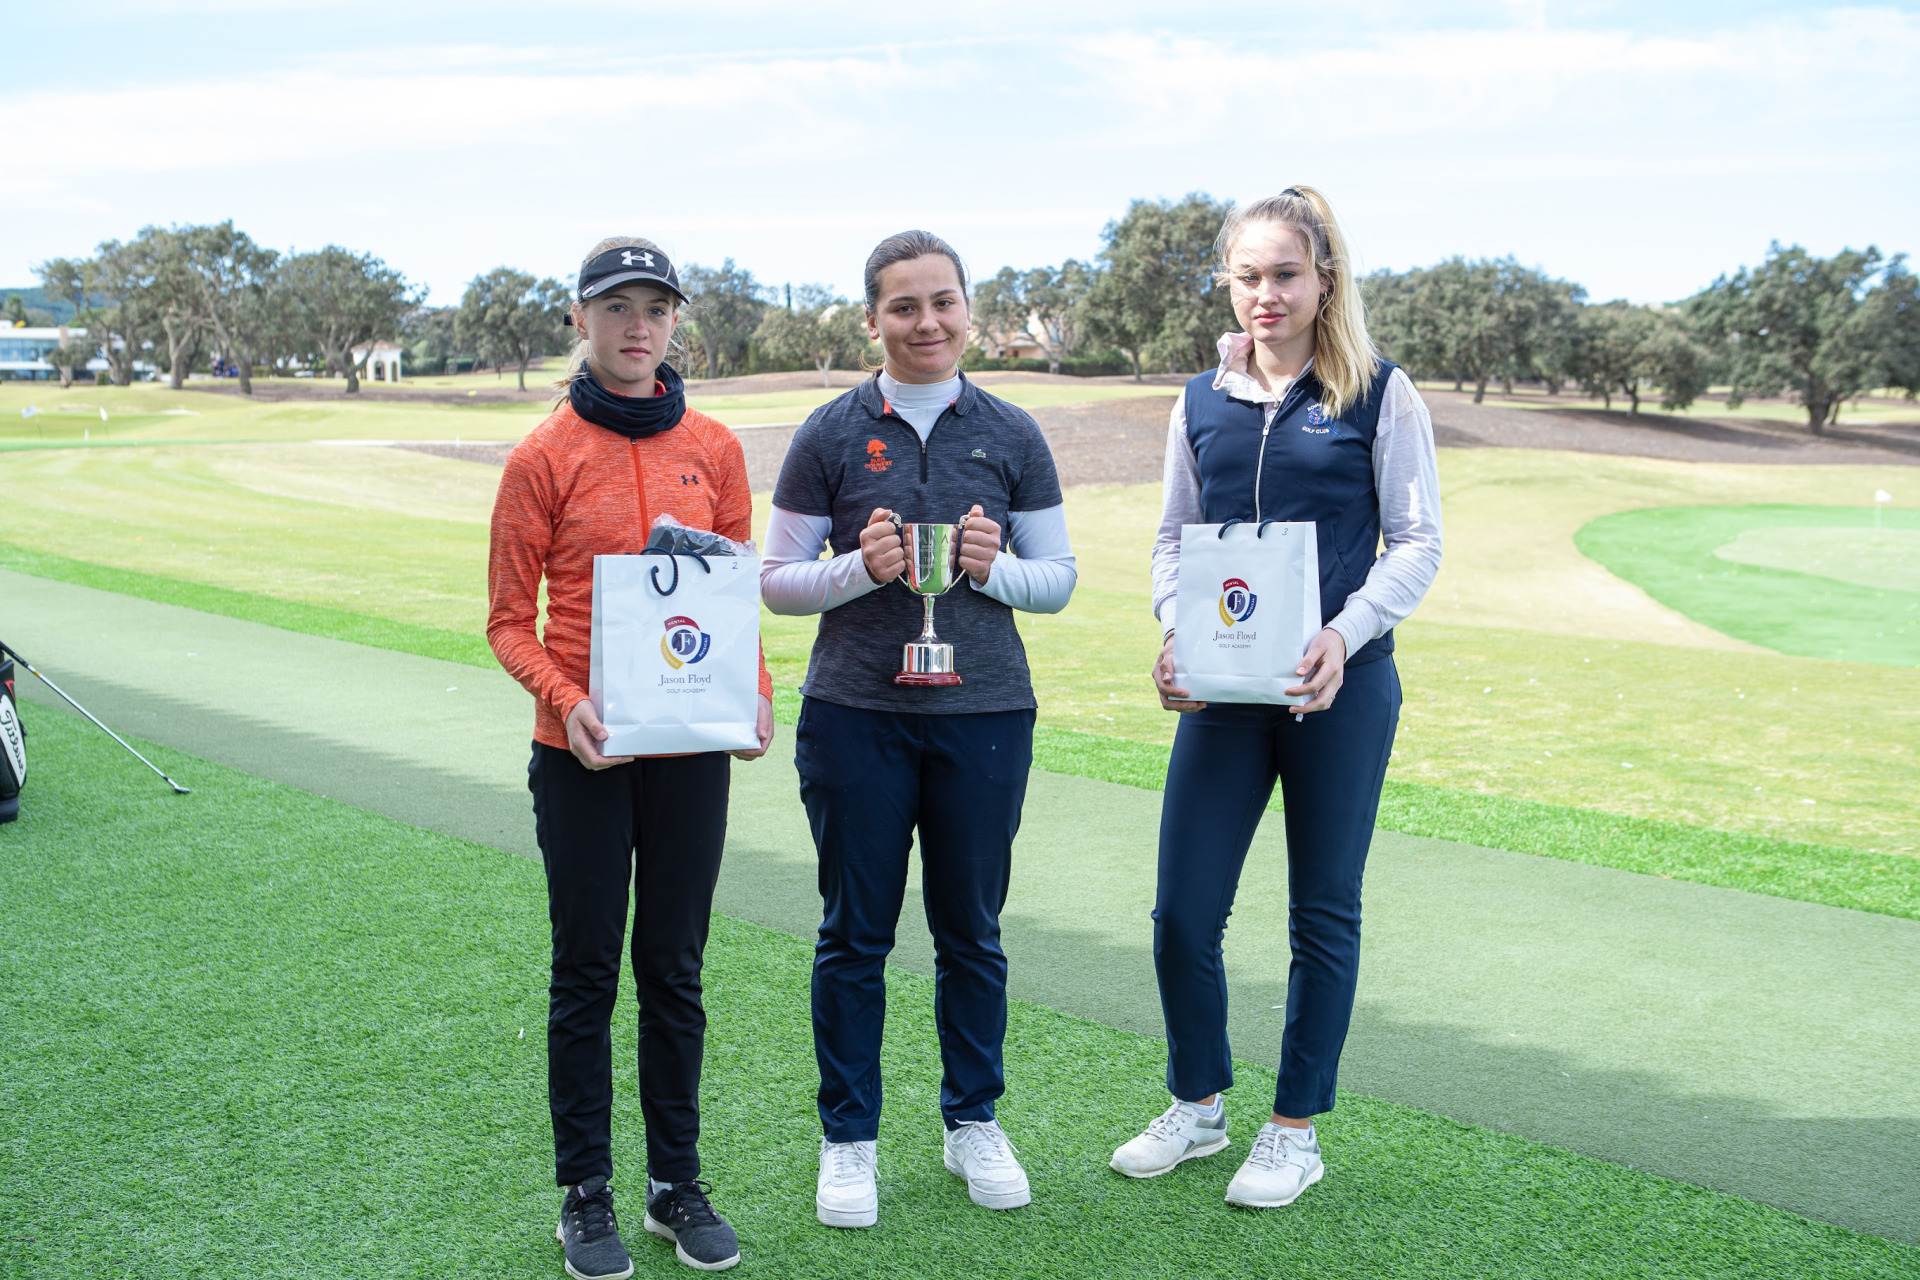 Triple A World Junior Golf Series - winners of the Triple A European Classic, Juliette Demeaux, Barbora Vinkler and Hannah Guerin at The San Roque Club, Old Course.